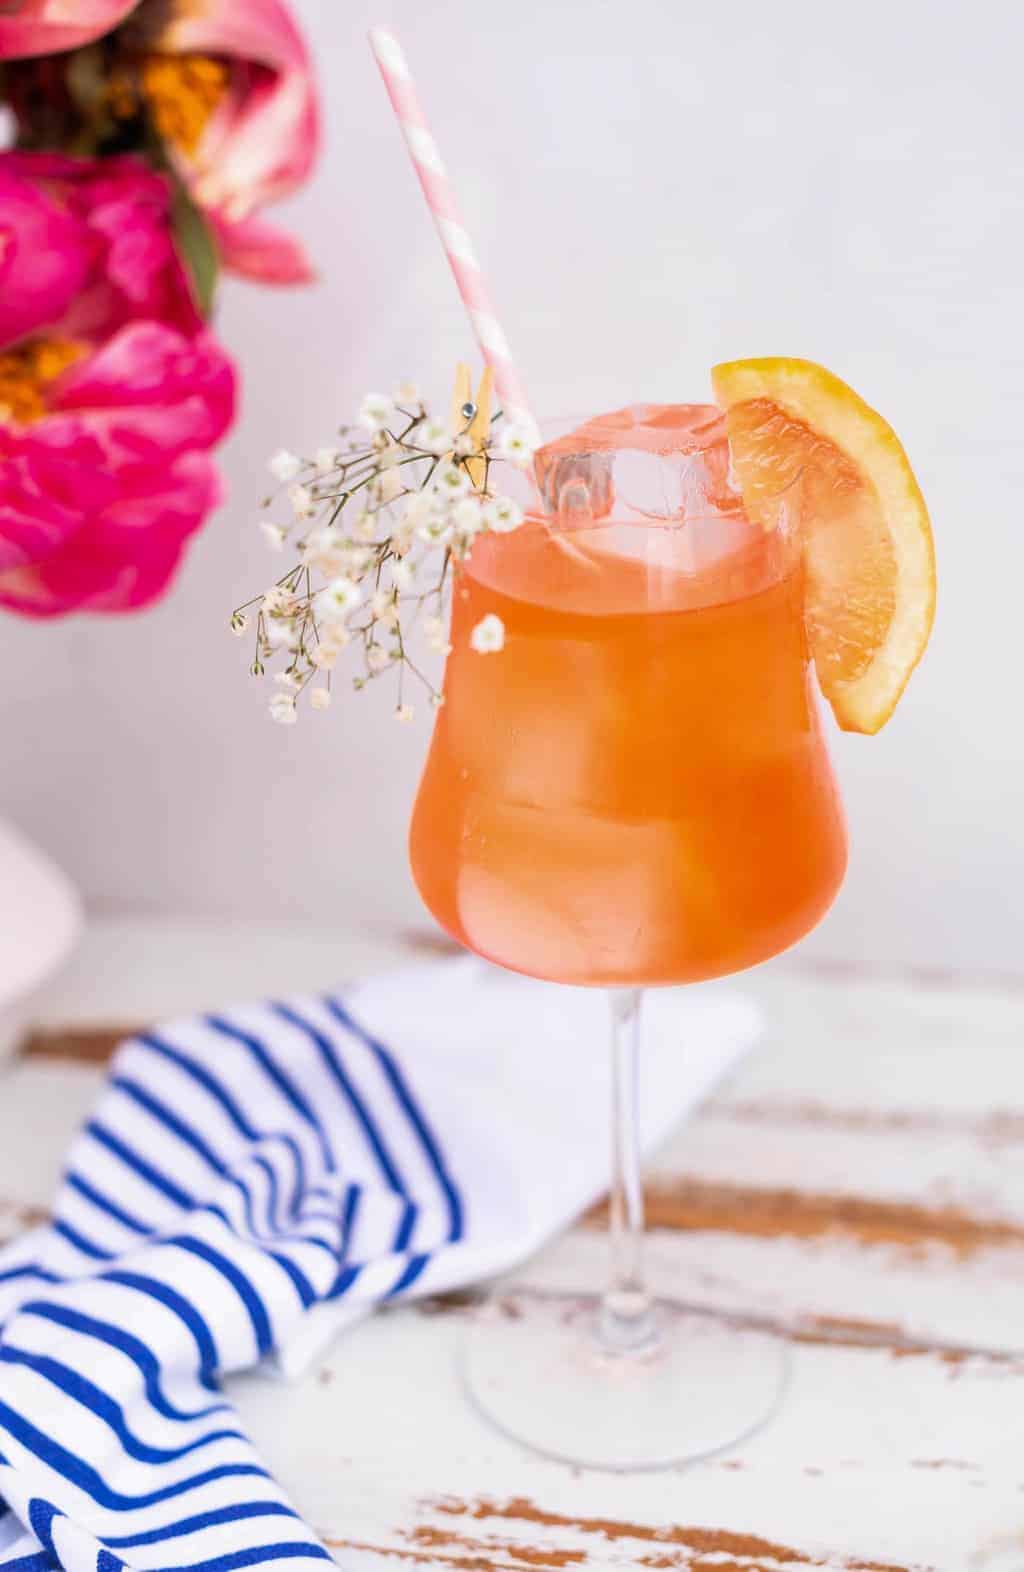 photo of he Elderflower Aperol Spritz cocktail recipe garnished with baby breath by top Houston lifestyle blogger Ashley Rose of Sugar & Cloth